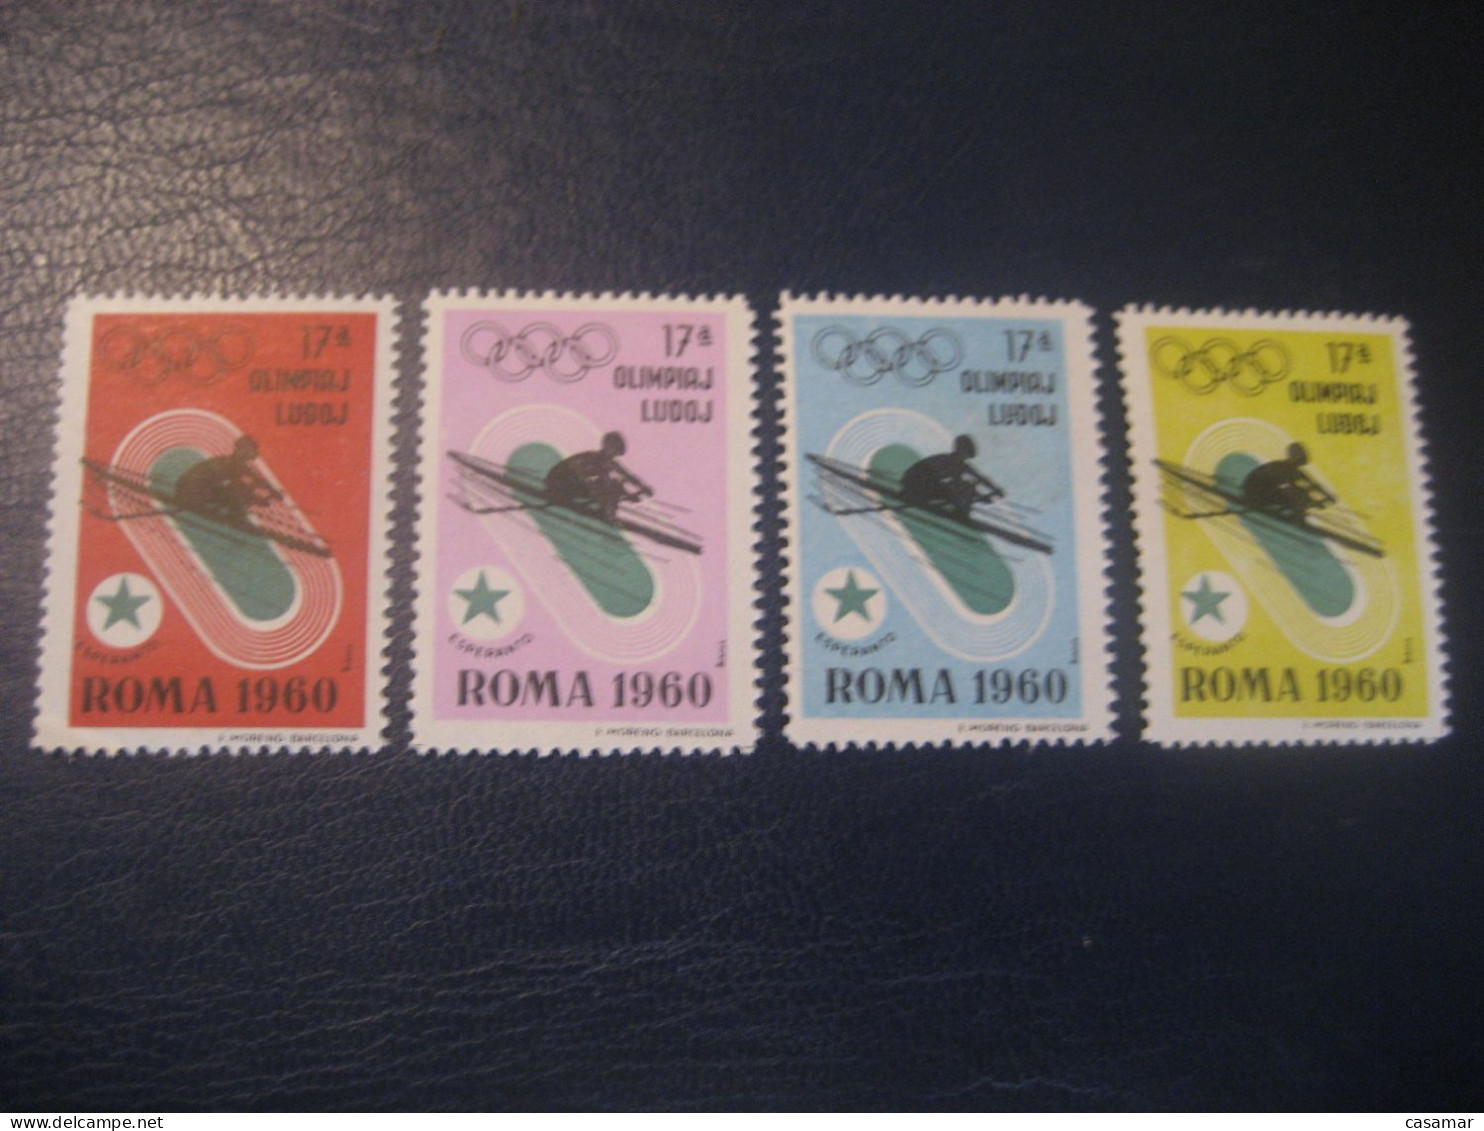 ROMA 1960 Rowing Aviron Olympic Games Olympics Esperanto 4 Poster Stamp Vignette ITALY Spain Label - Remo